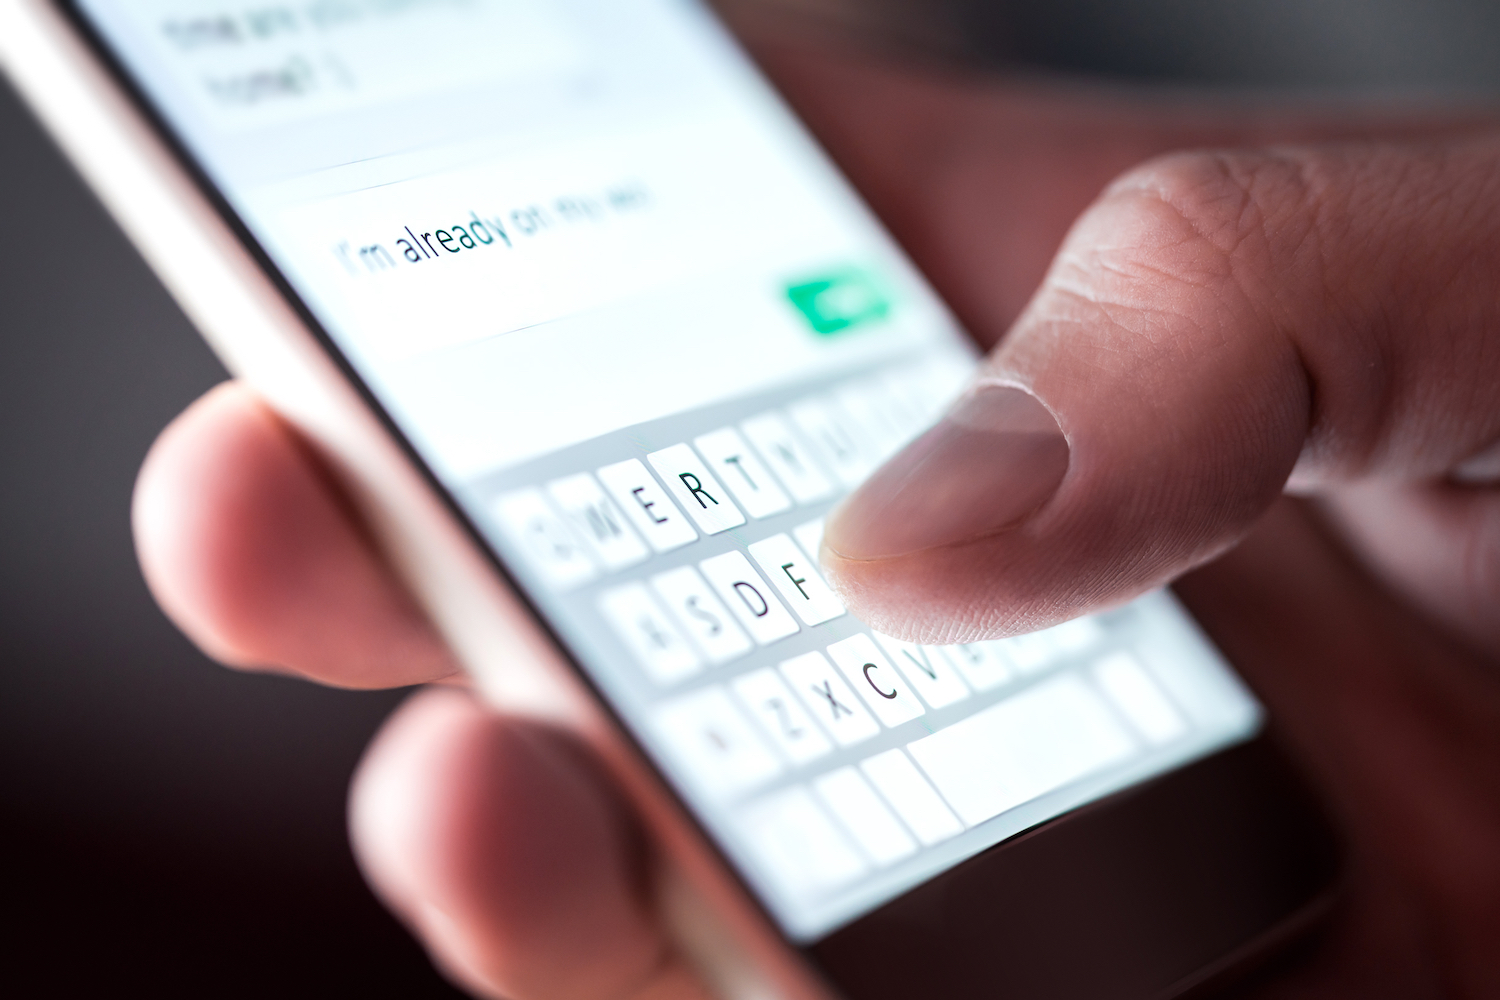 A close-up image of someone text messaging.